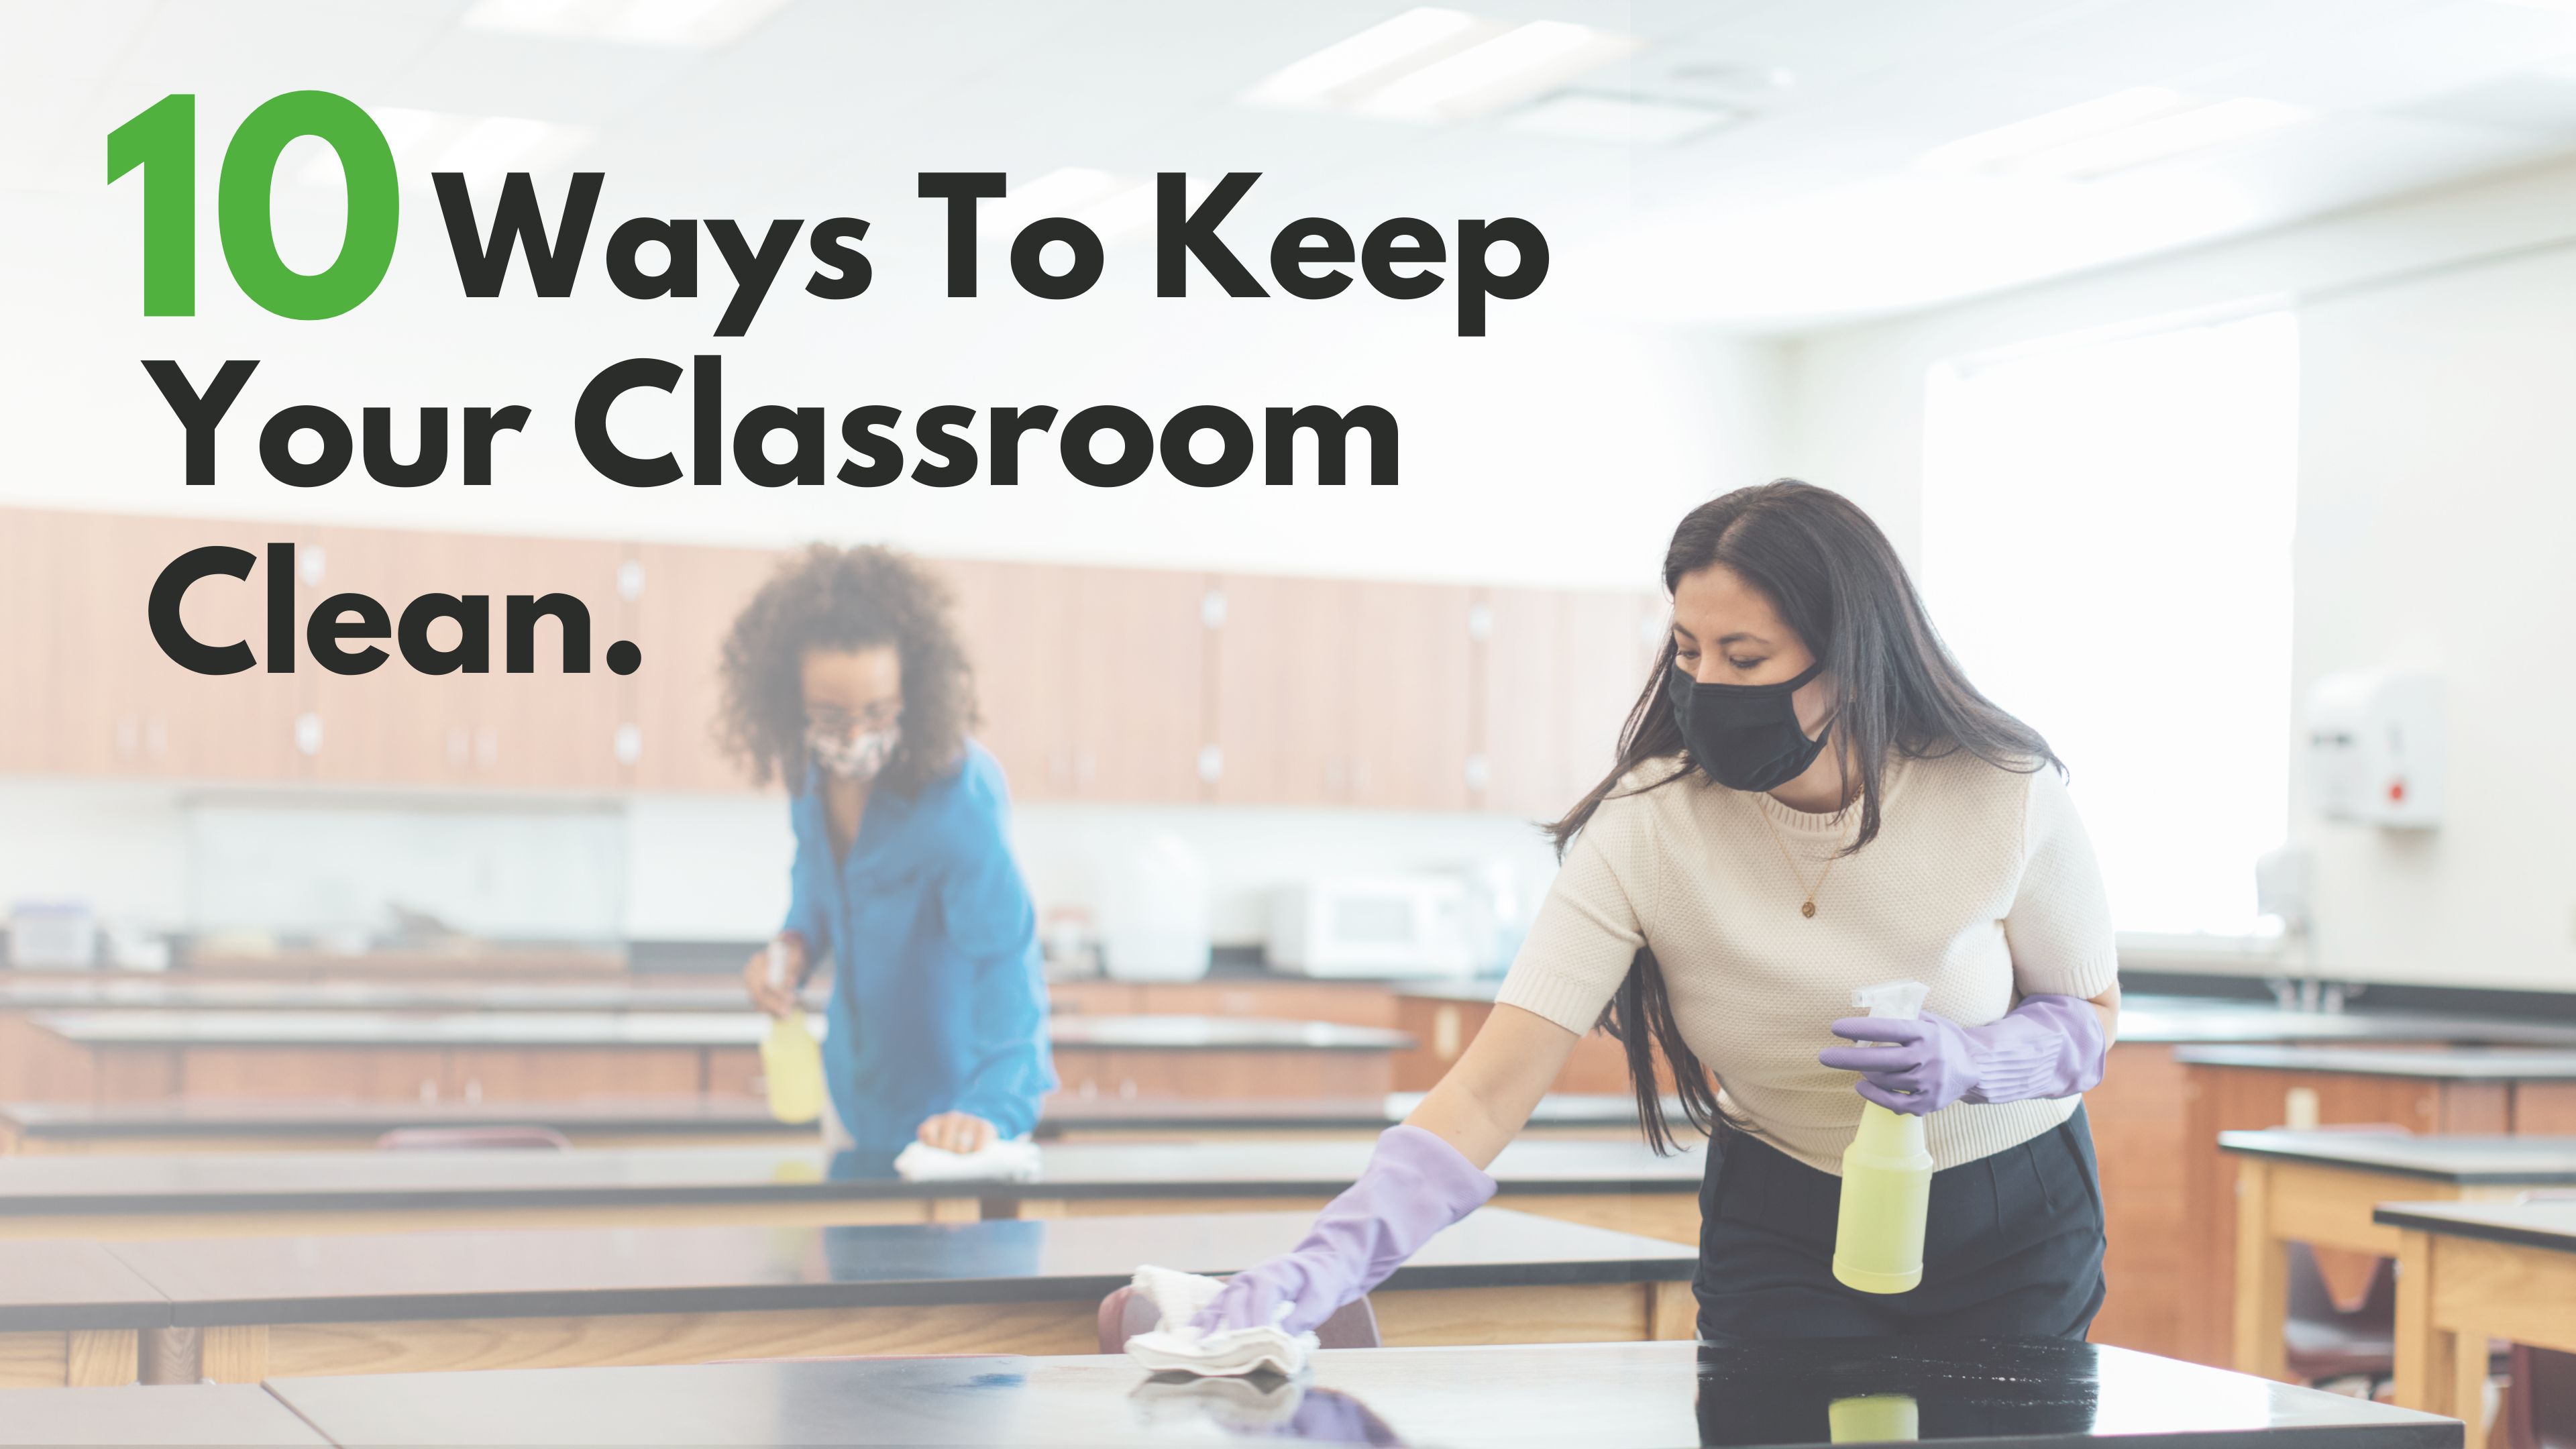 A clean classroom is not only aesthetically pleasing but also crucial for the well-being and productivity of both students and teachers.